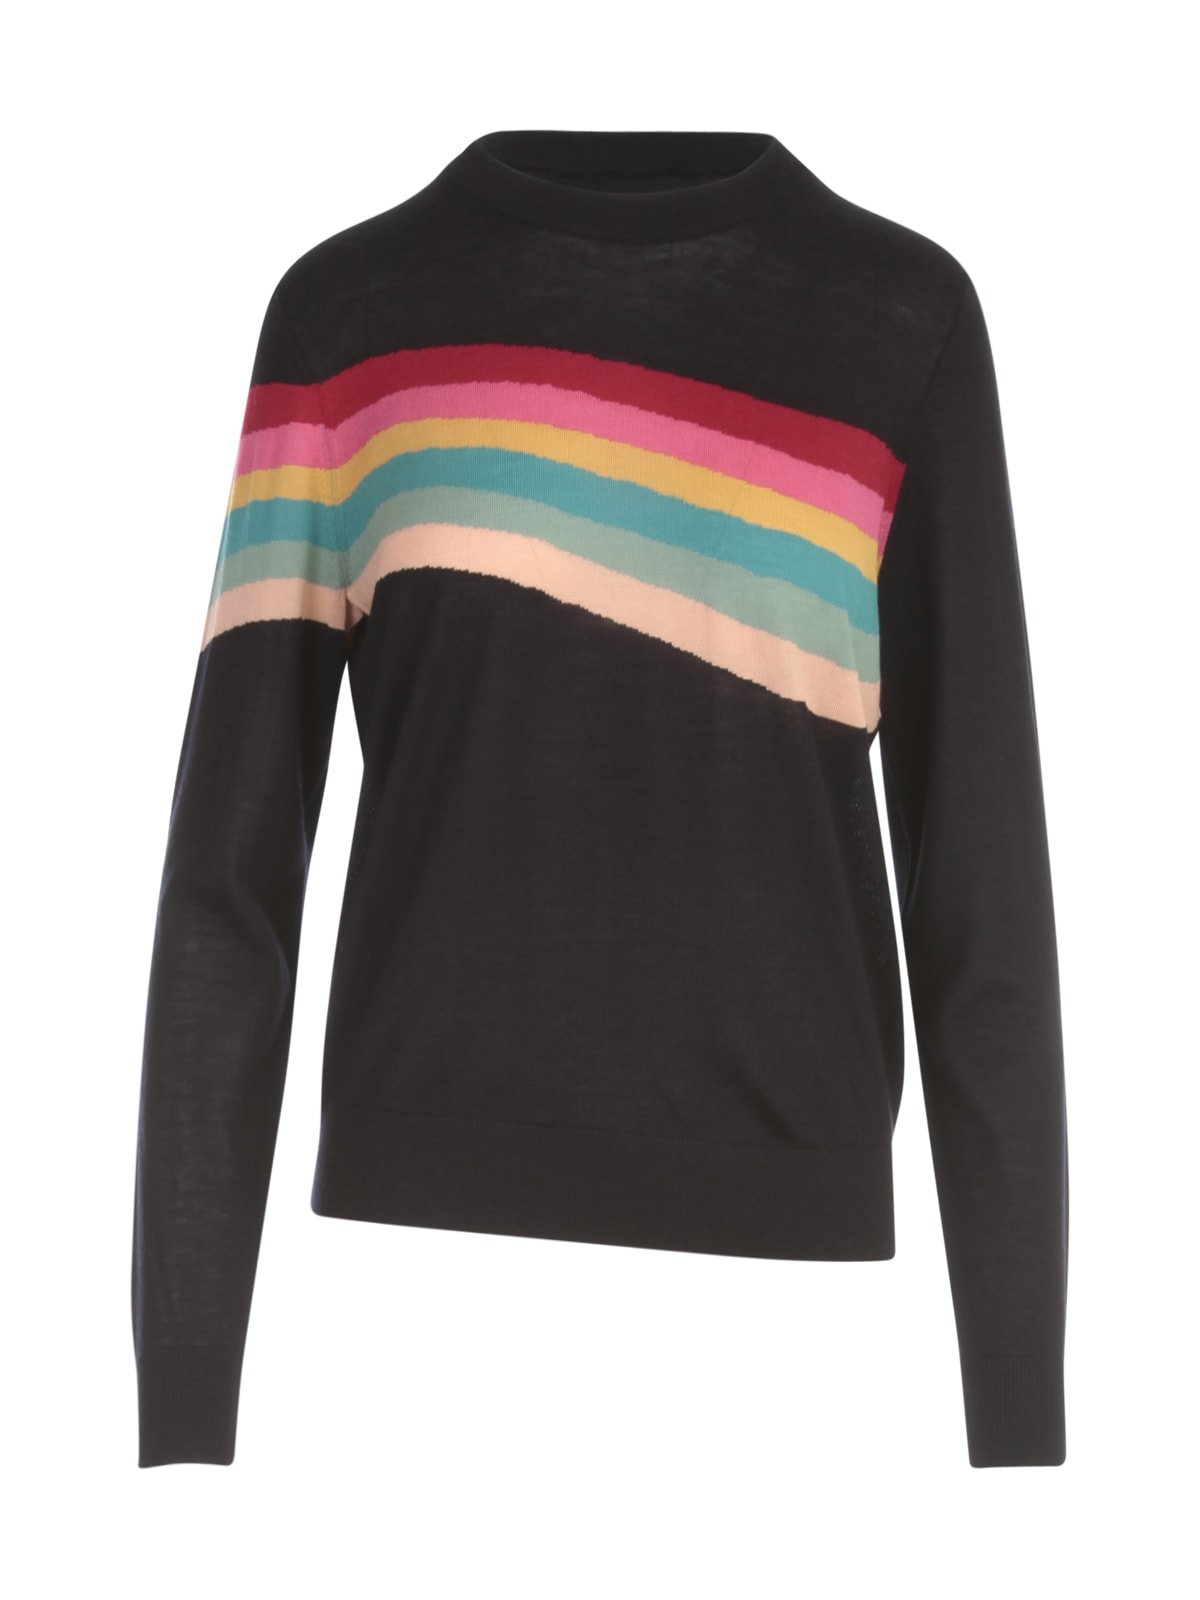 PS by Paul Smith Striped Crew Neck L/s Sweater